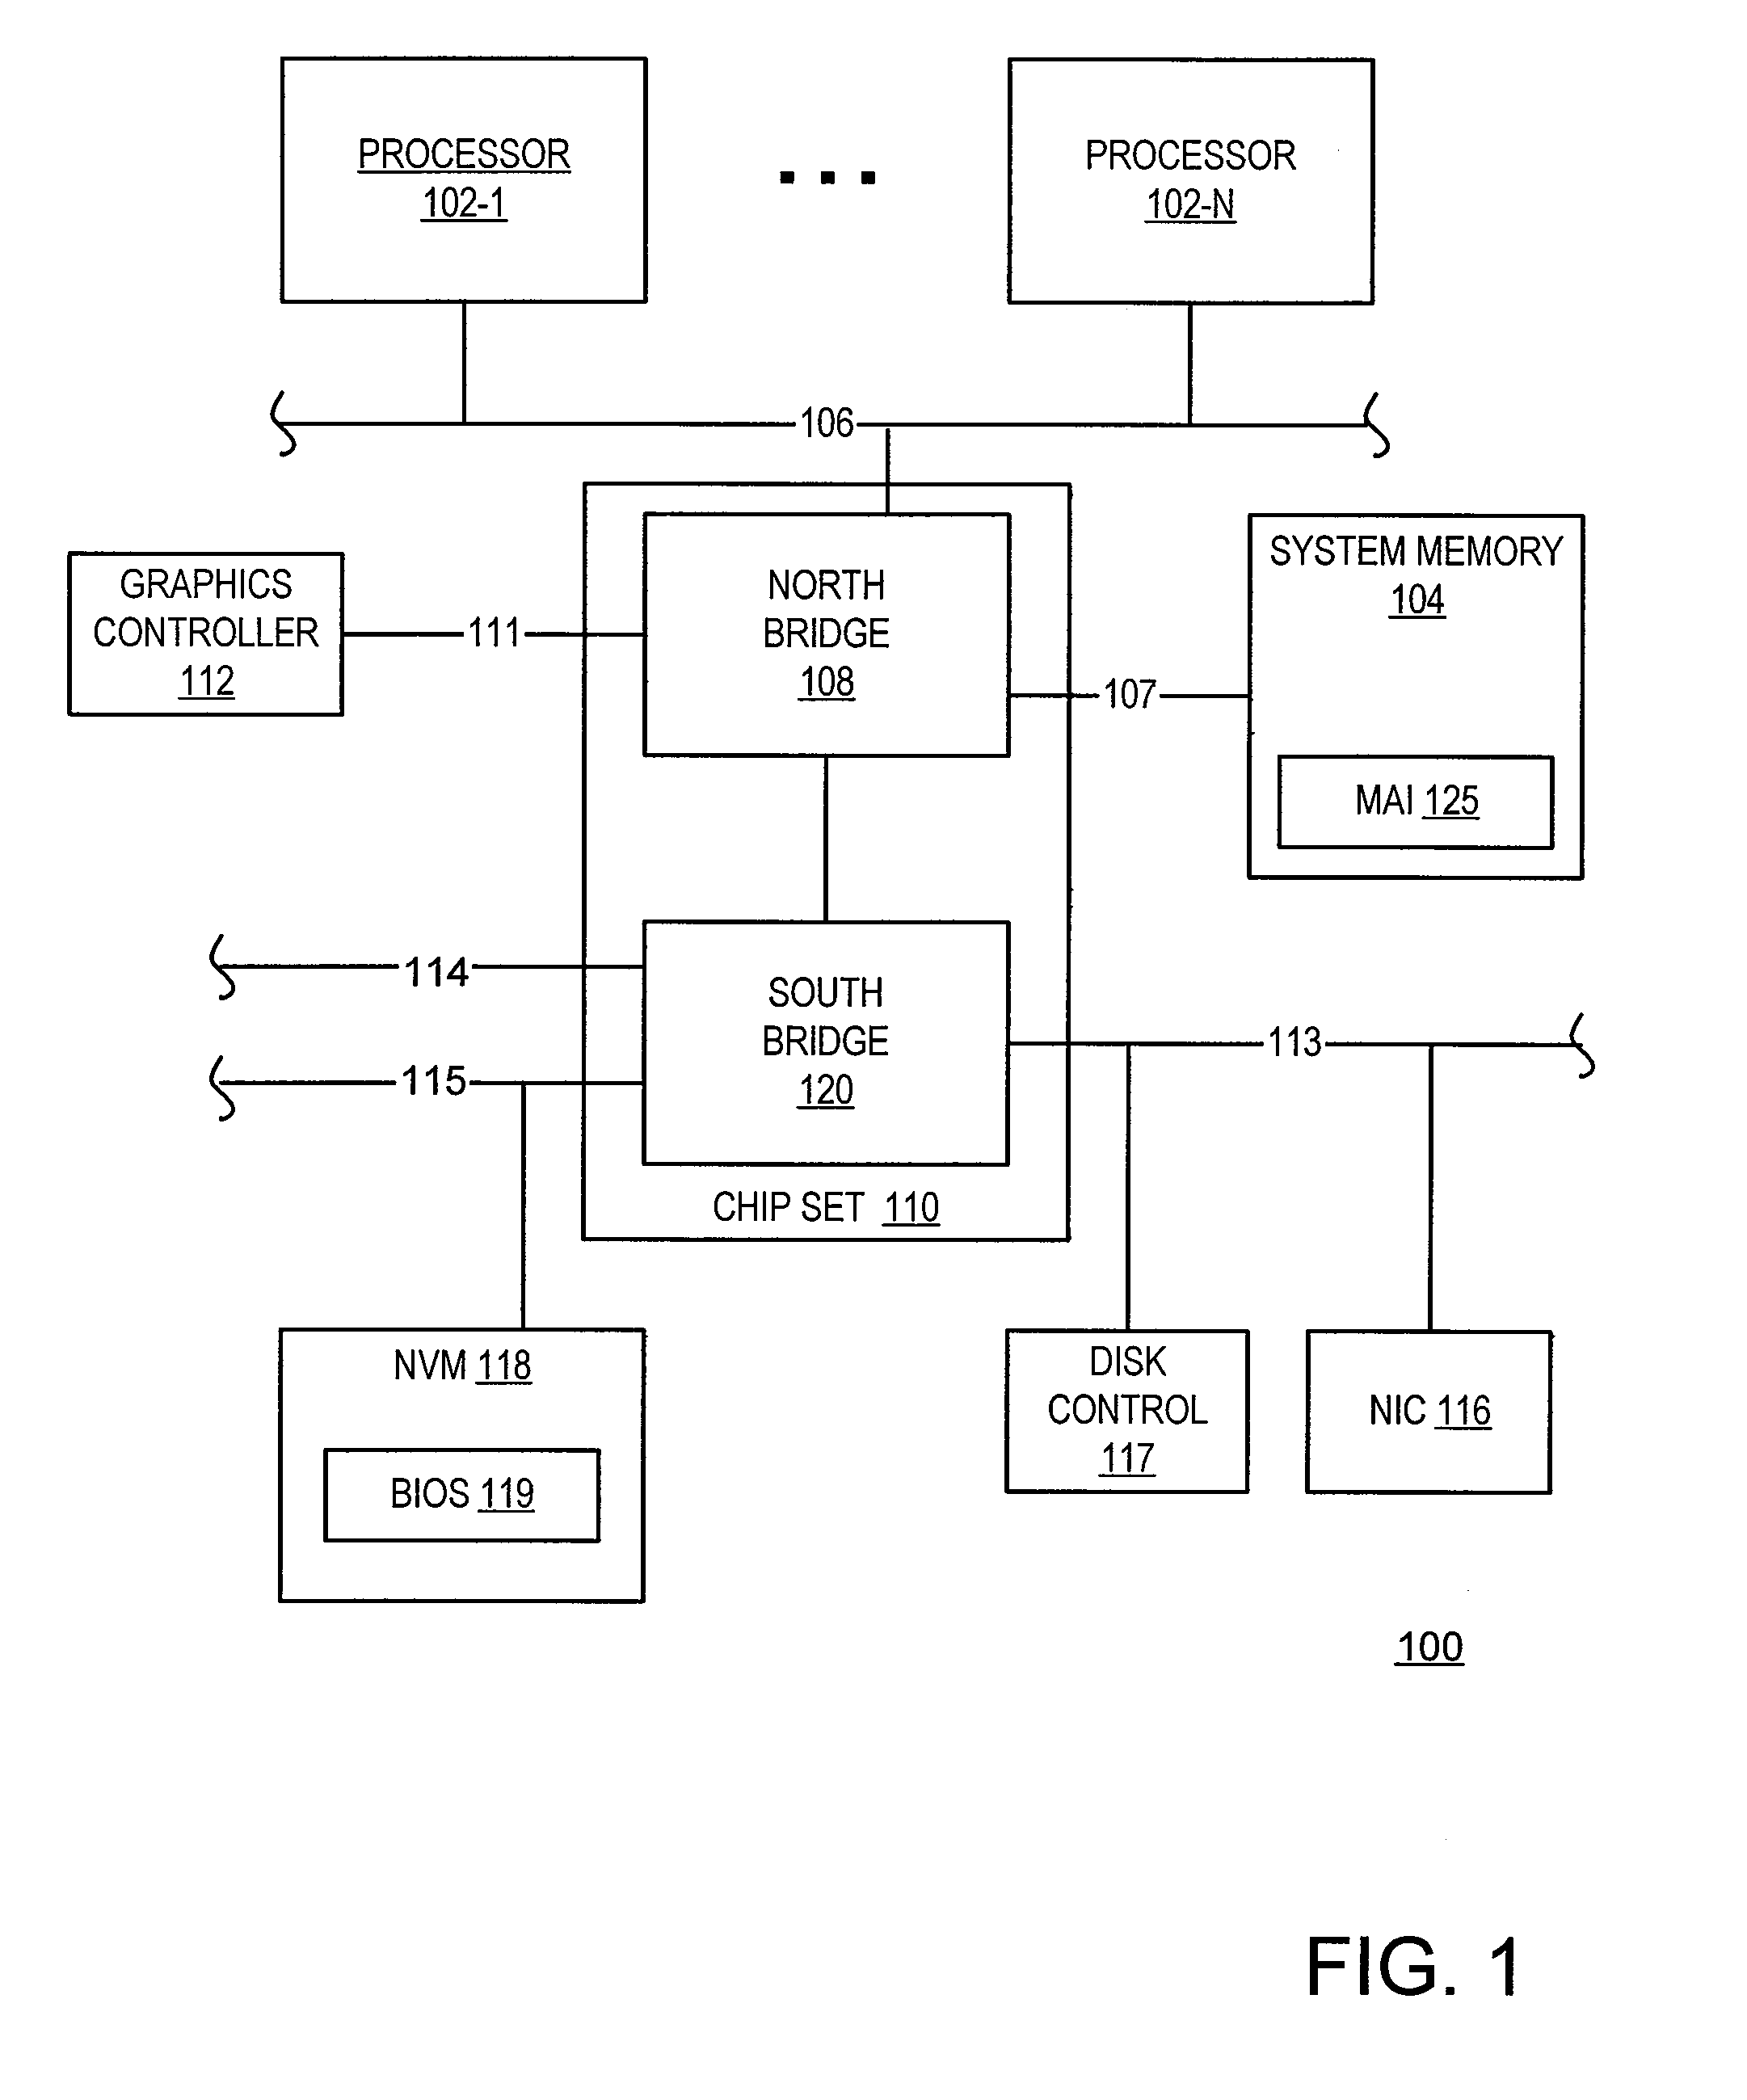 Thermal control of memory modules using proximity information